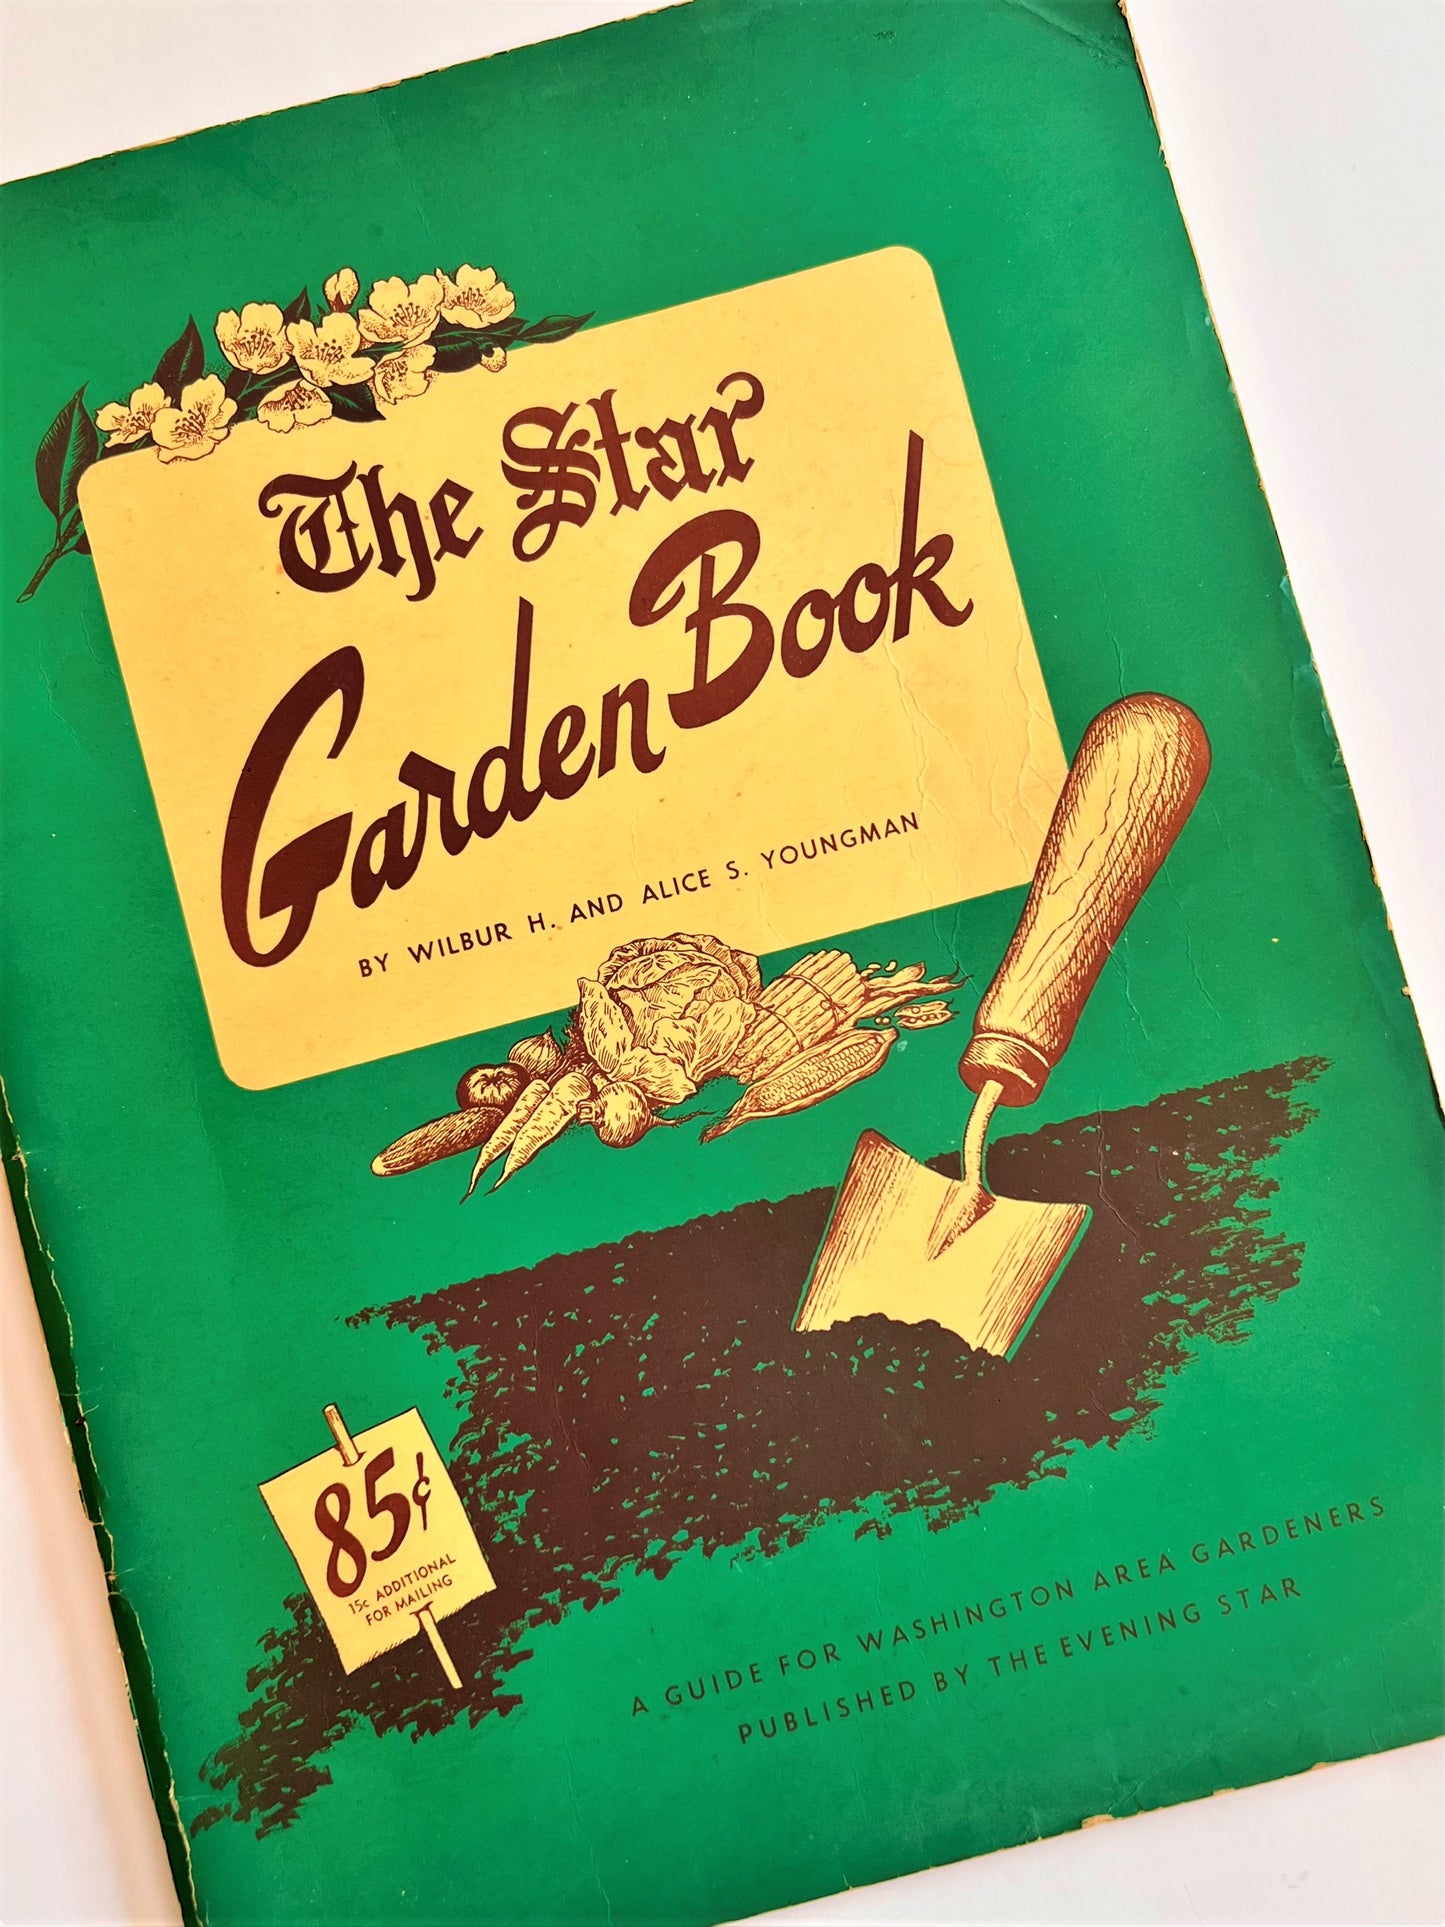 The Star Garden Book by Wilbur H. and Alice S. Youngman, 1951